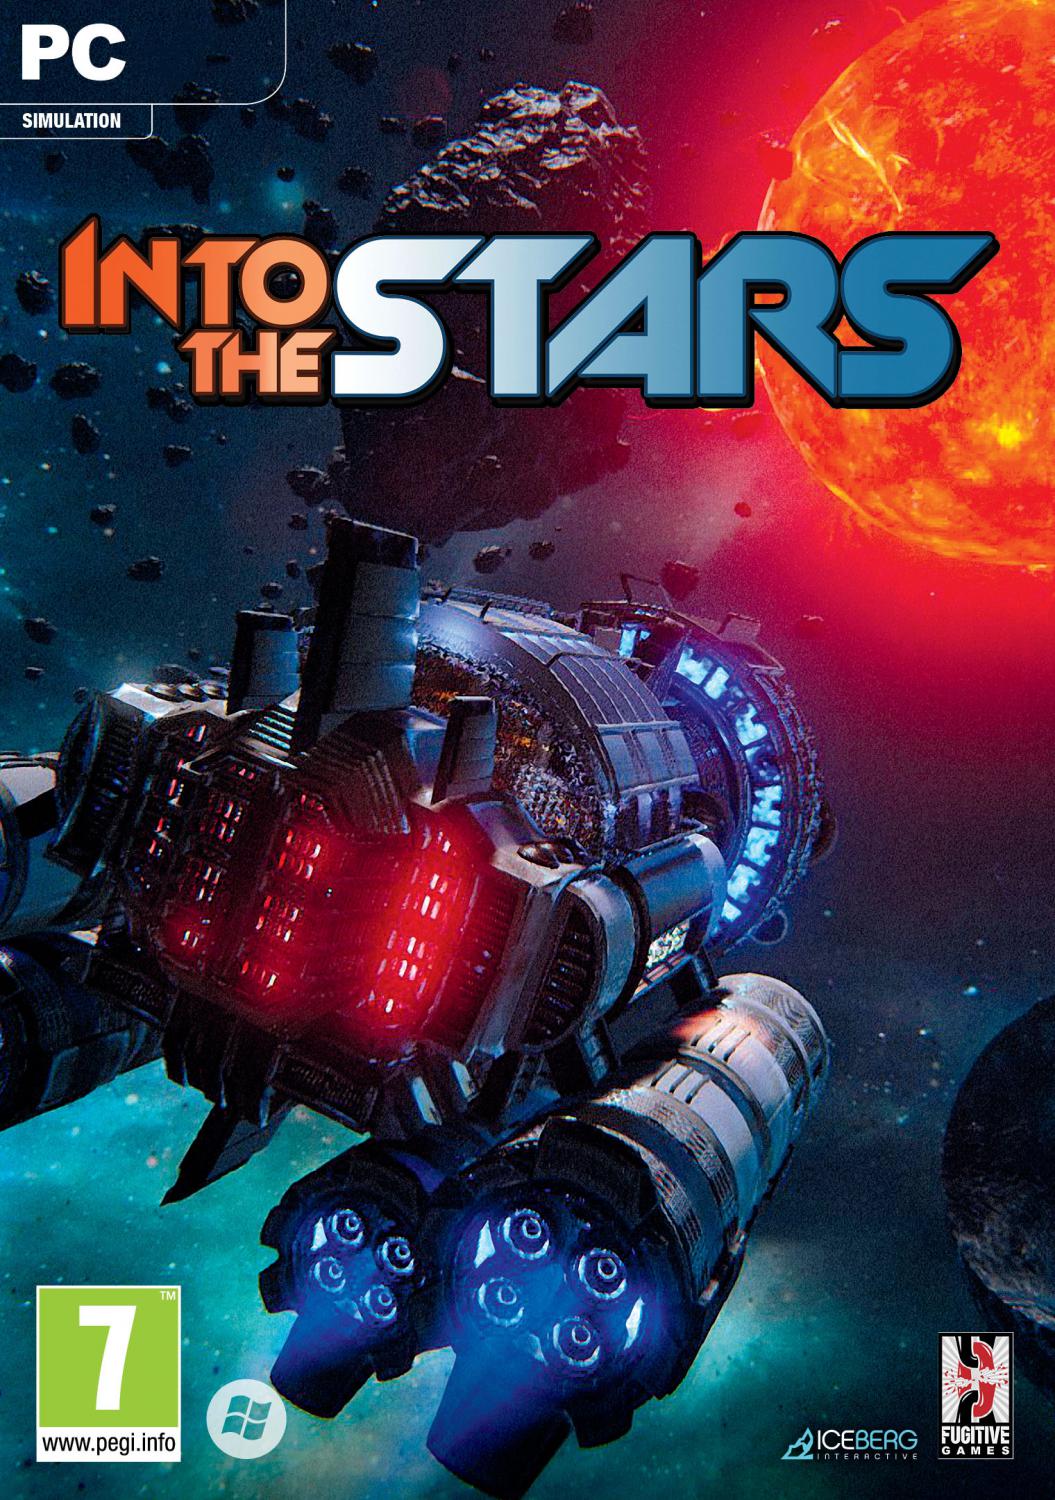 Into the Stars - Digital Deluxe